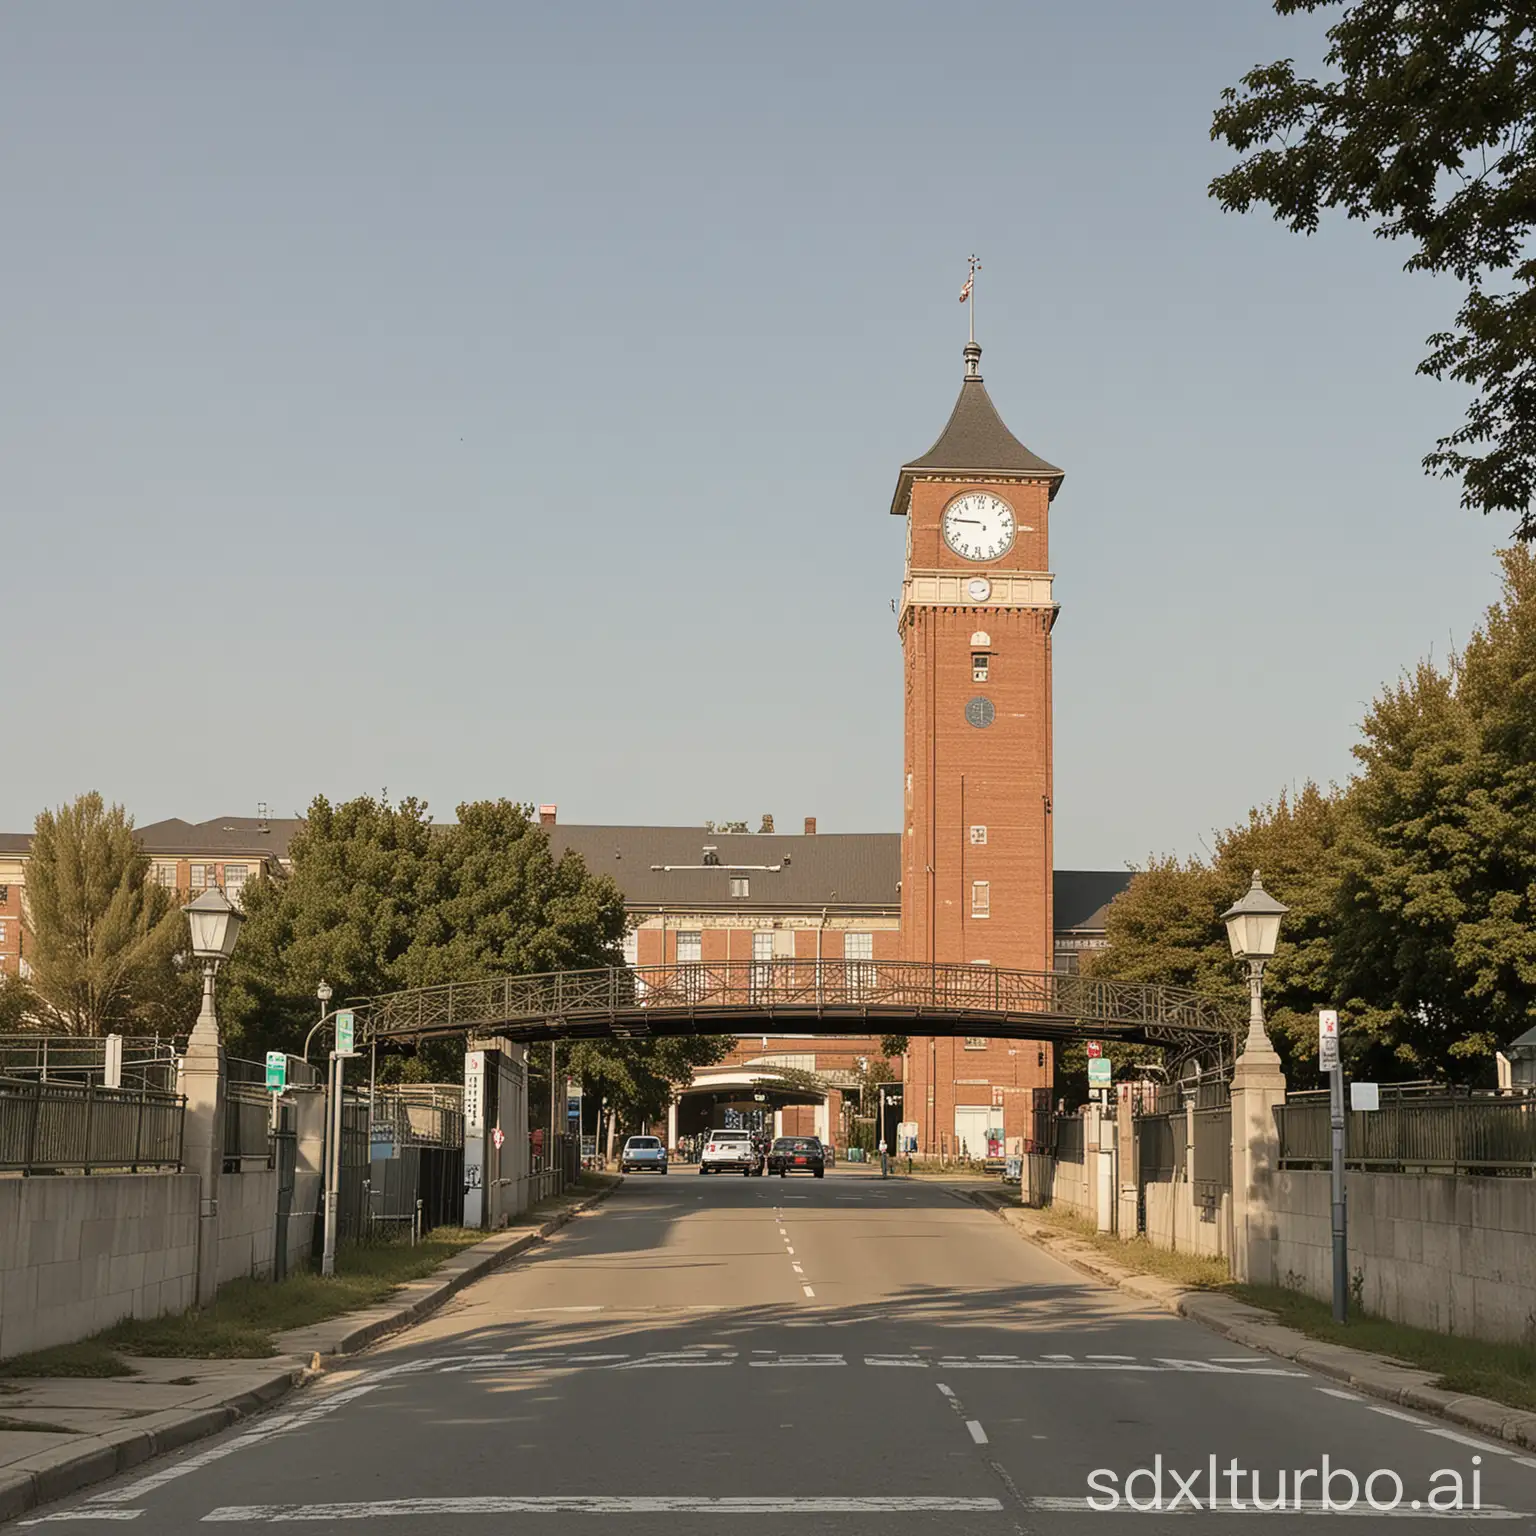 A large clock tower is at the school gate, with the junior high school on the left and the elementary school on the right, connected by a bridge in the middle.